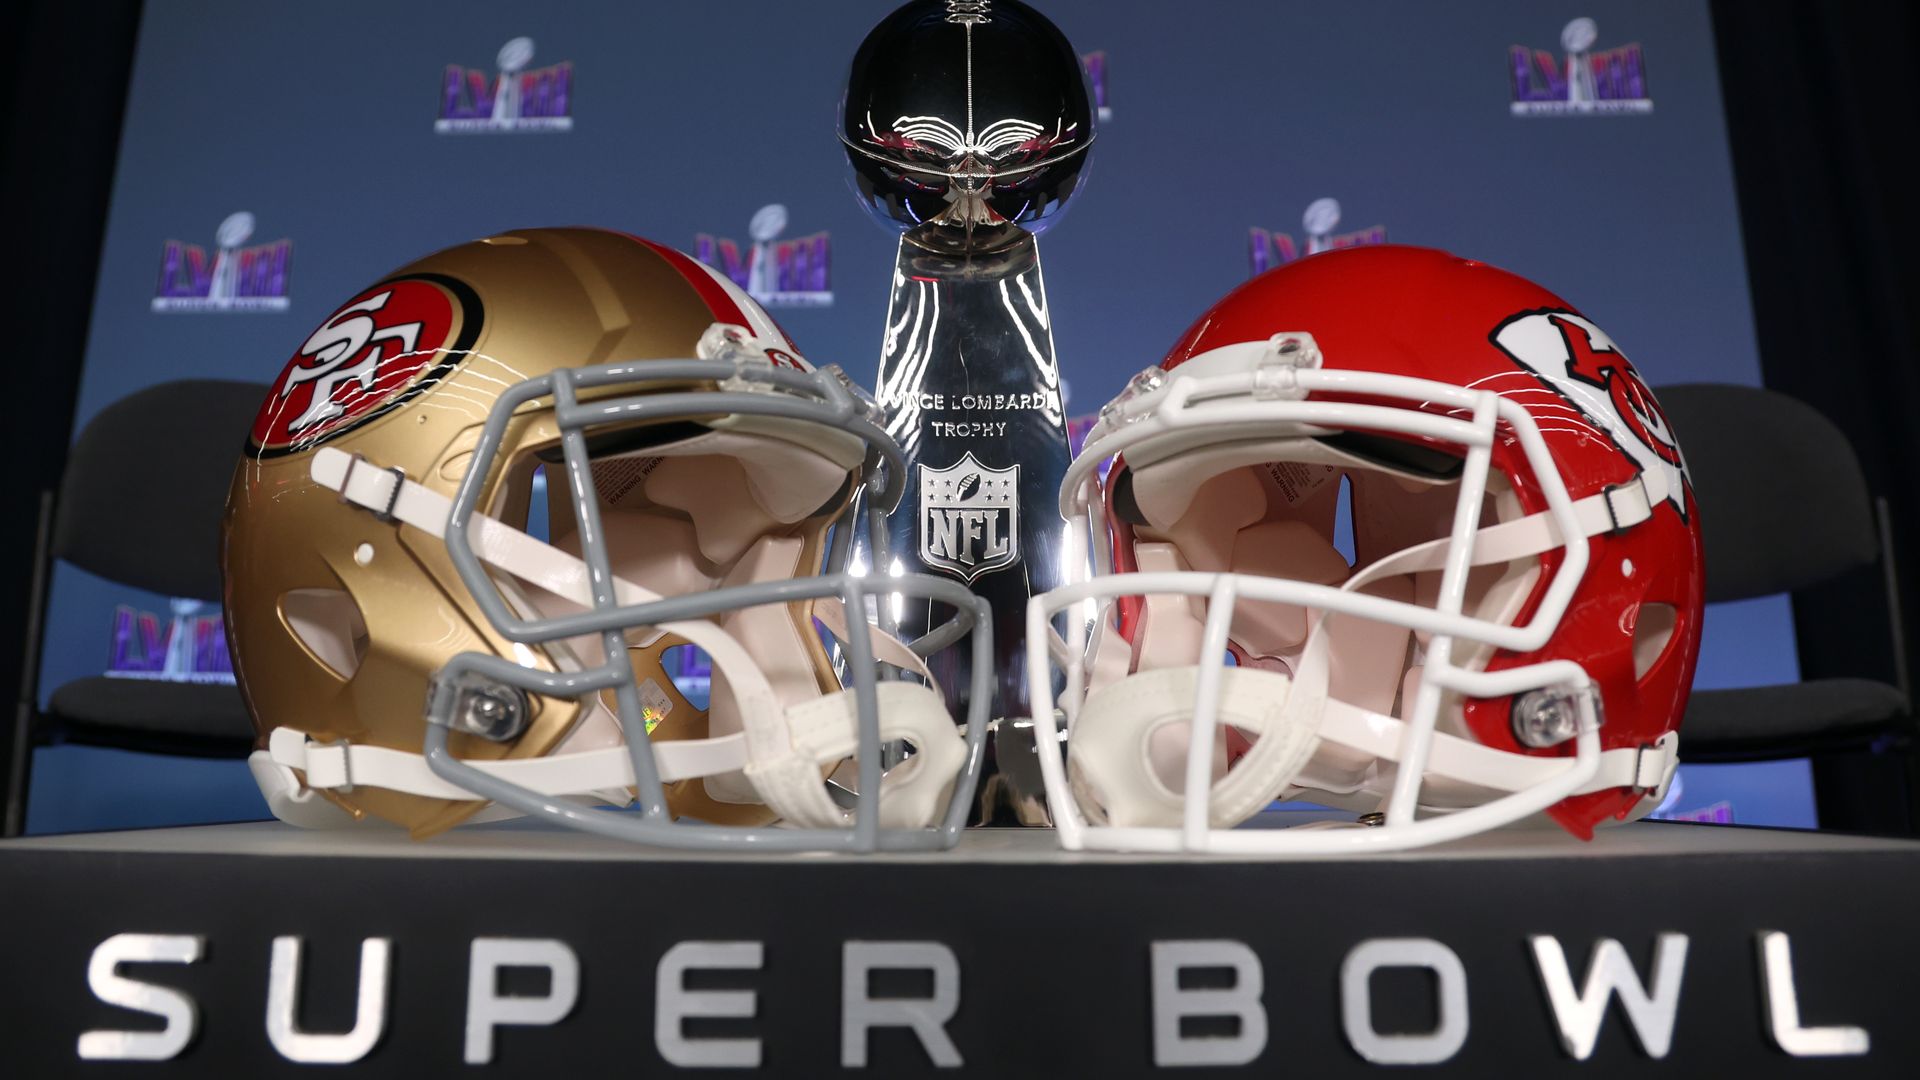 The helmets of Super Bowl LVIII participants San Francisco 49ers and Kansas City Chiefs and the Lombardi Trophy. 